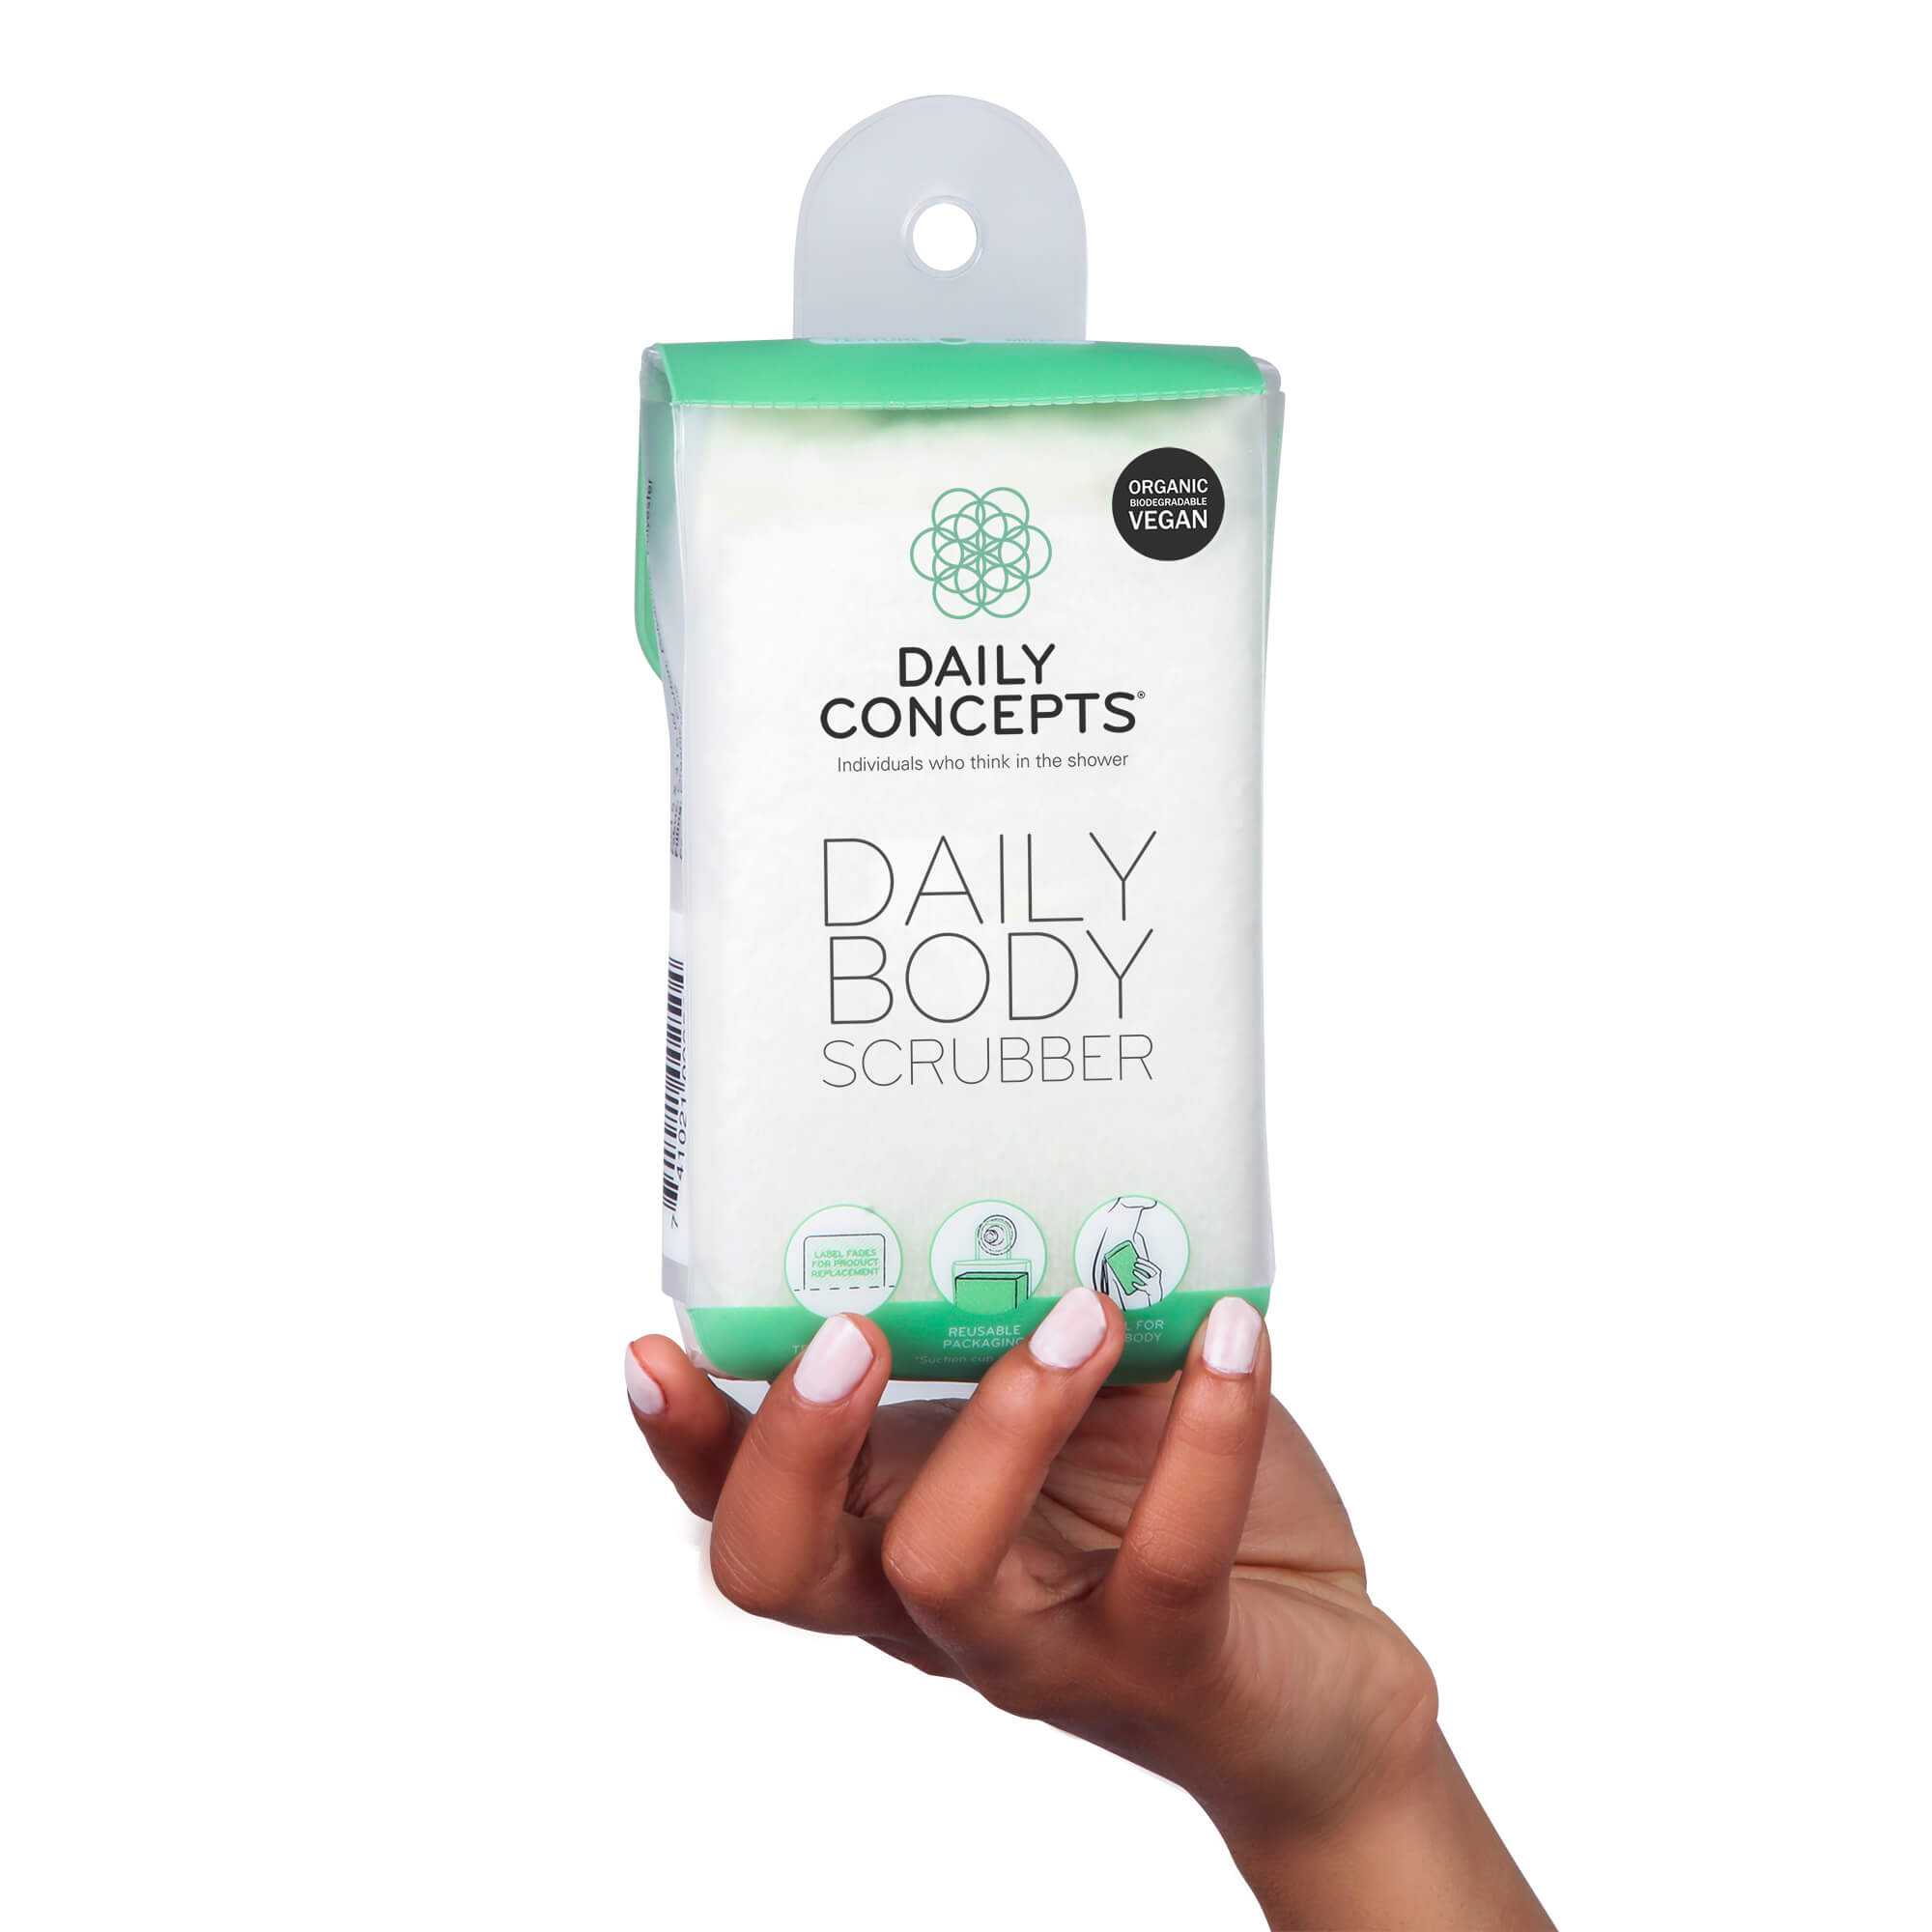 Daily Body Scrubber by Daily Concepts luxury Spa goods – DAILY CONCEPTS